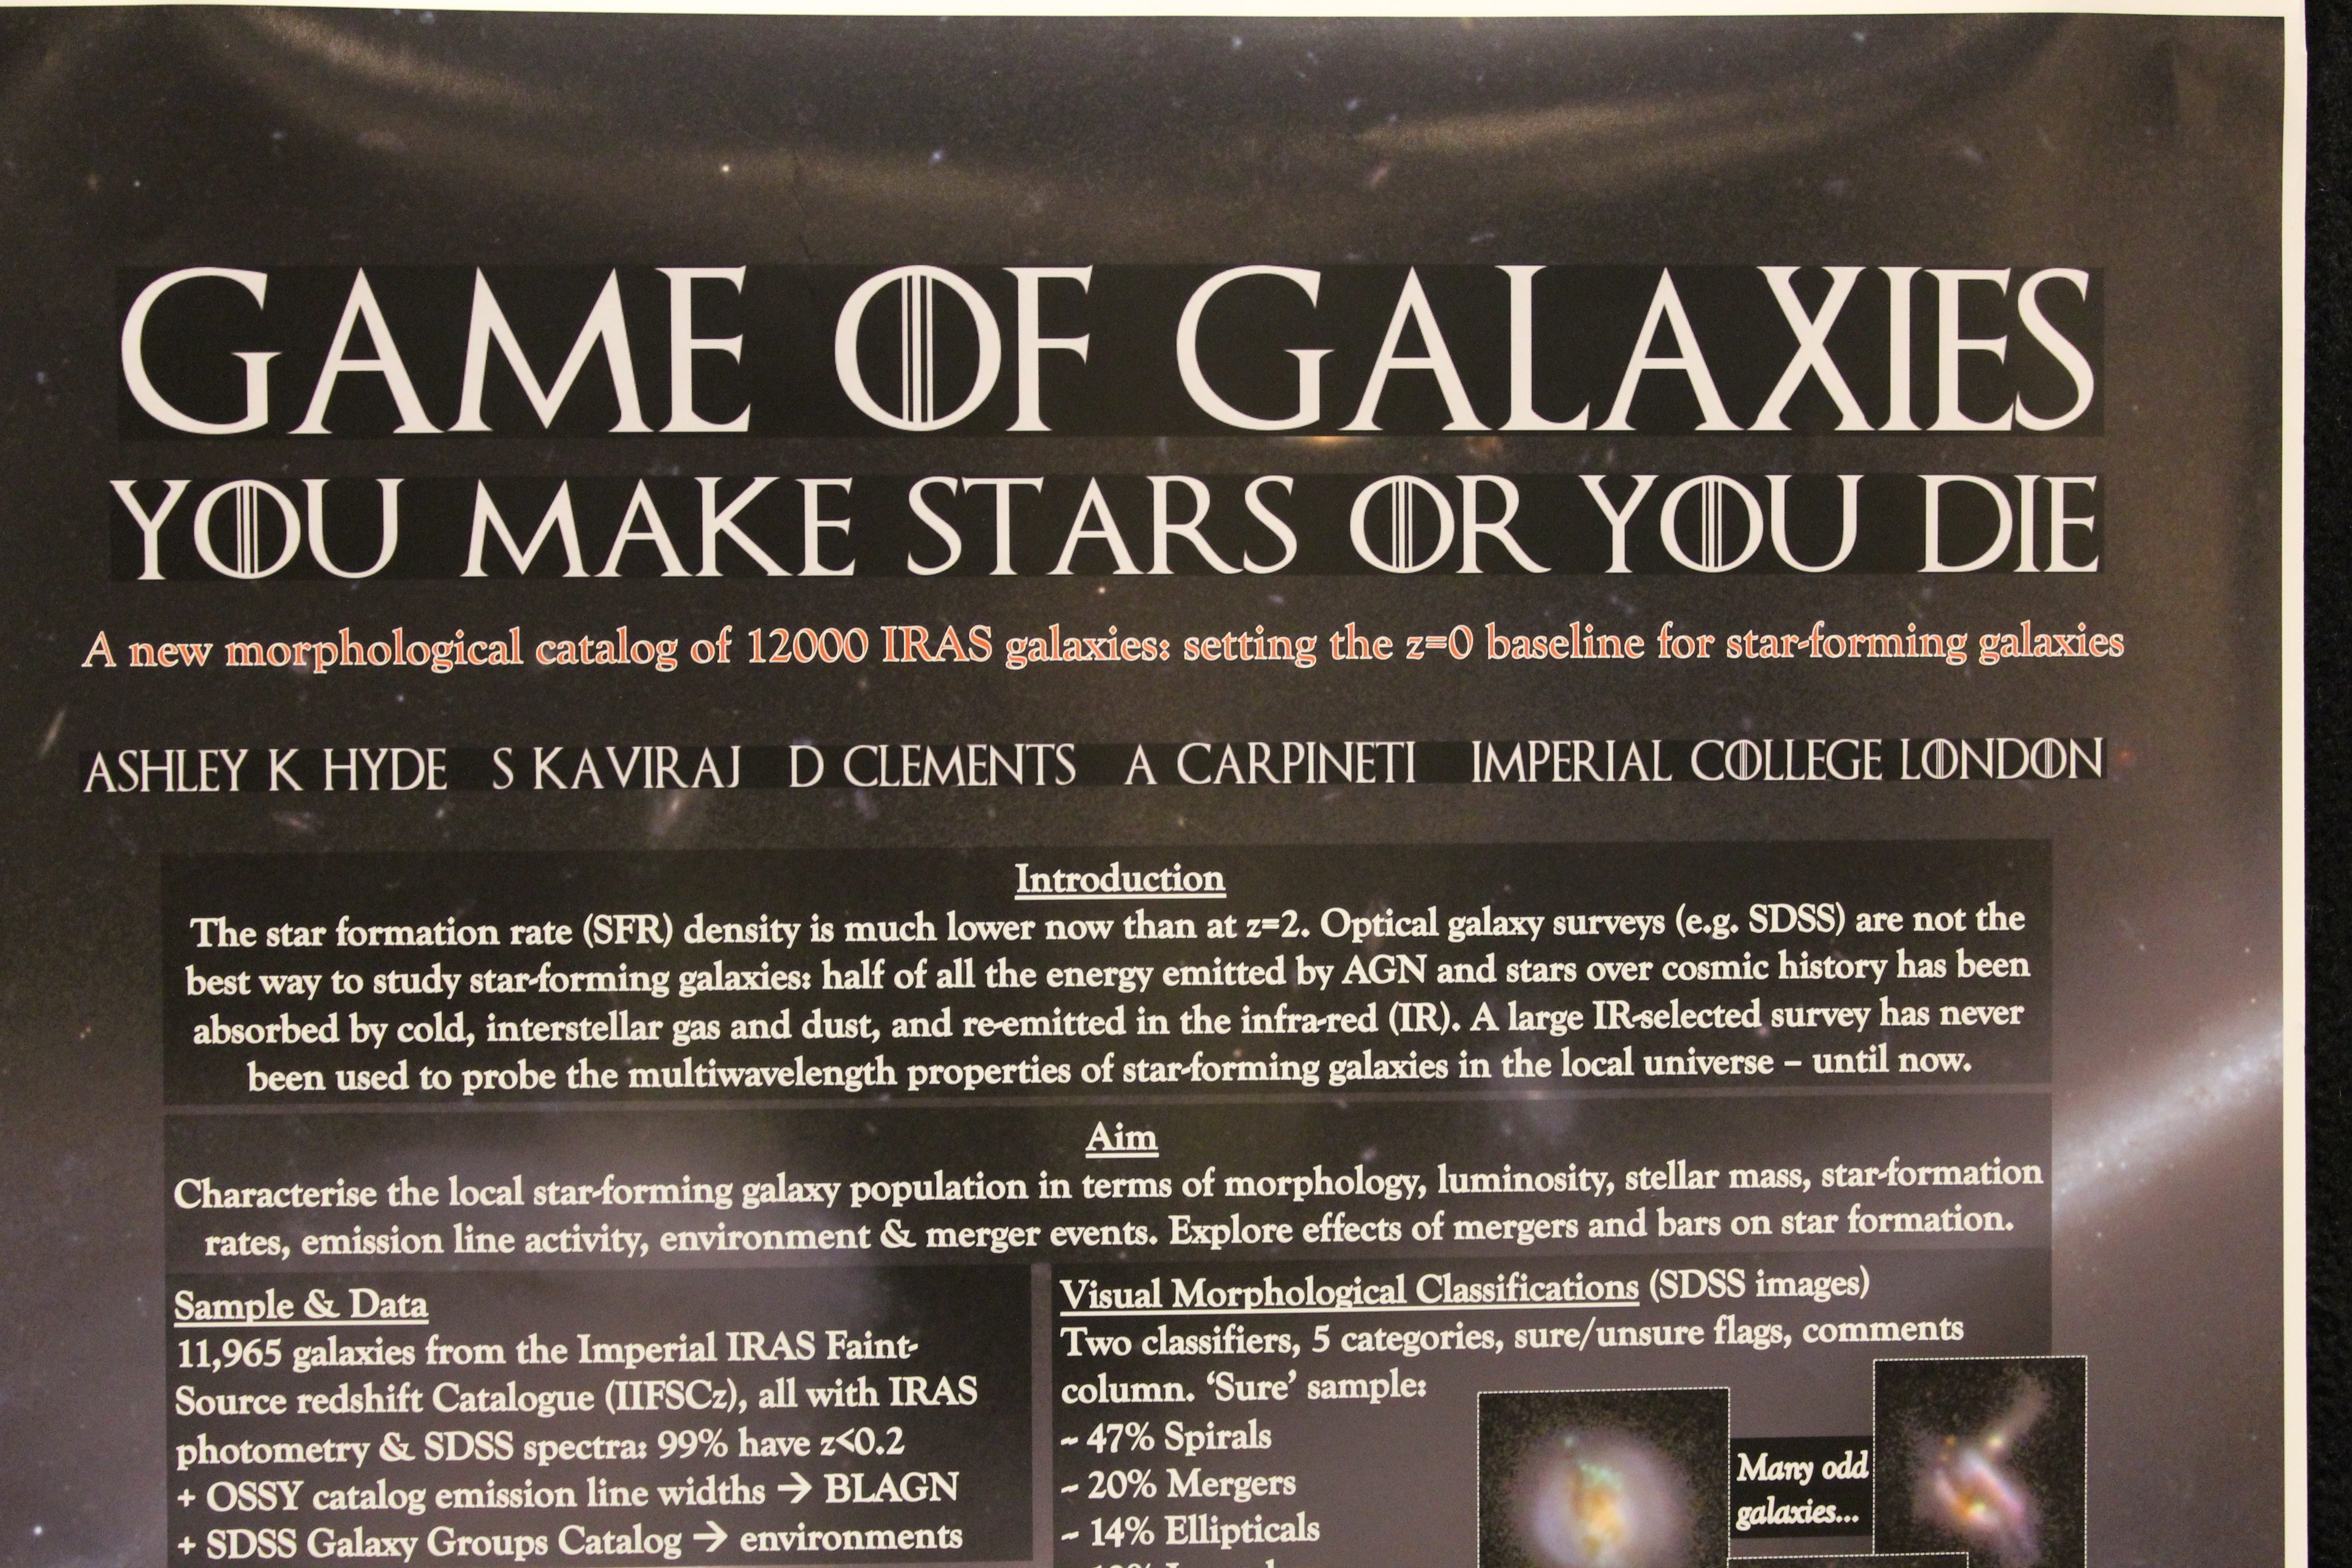 A poster saying "Game of galaxies".